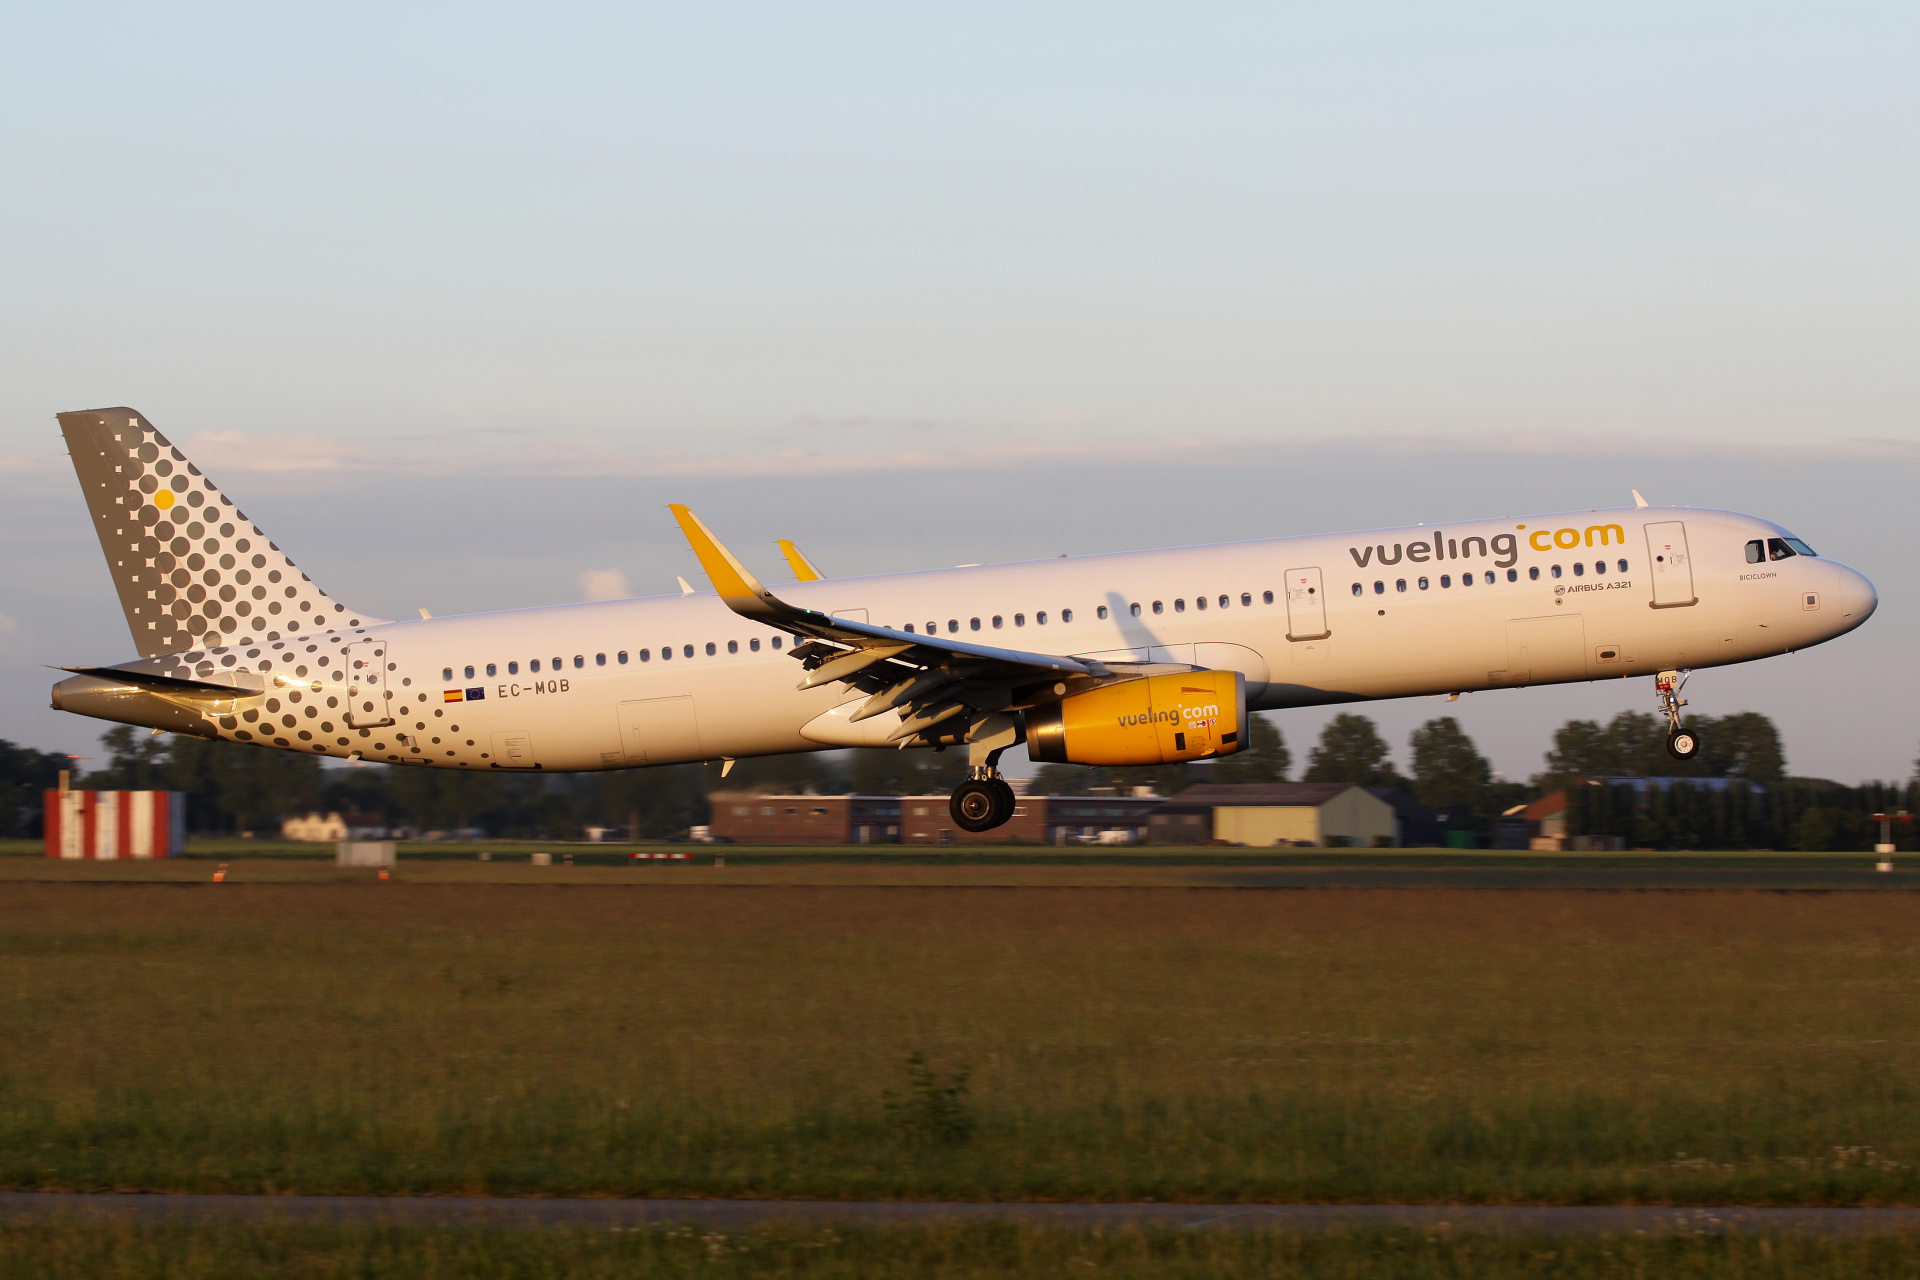 EC-MQB, Vueling Airlines (Samoloty » Spotting na Schiphol » Airbus A321-200)